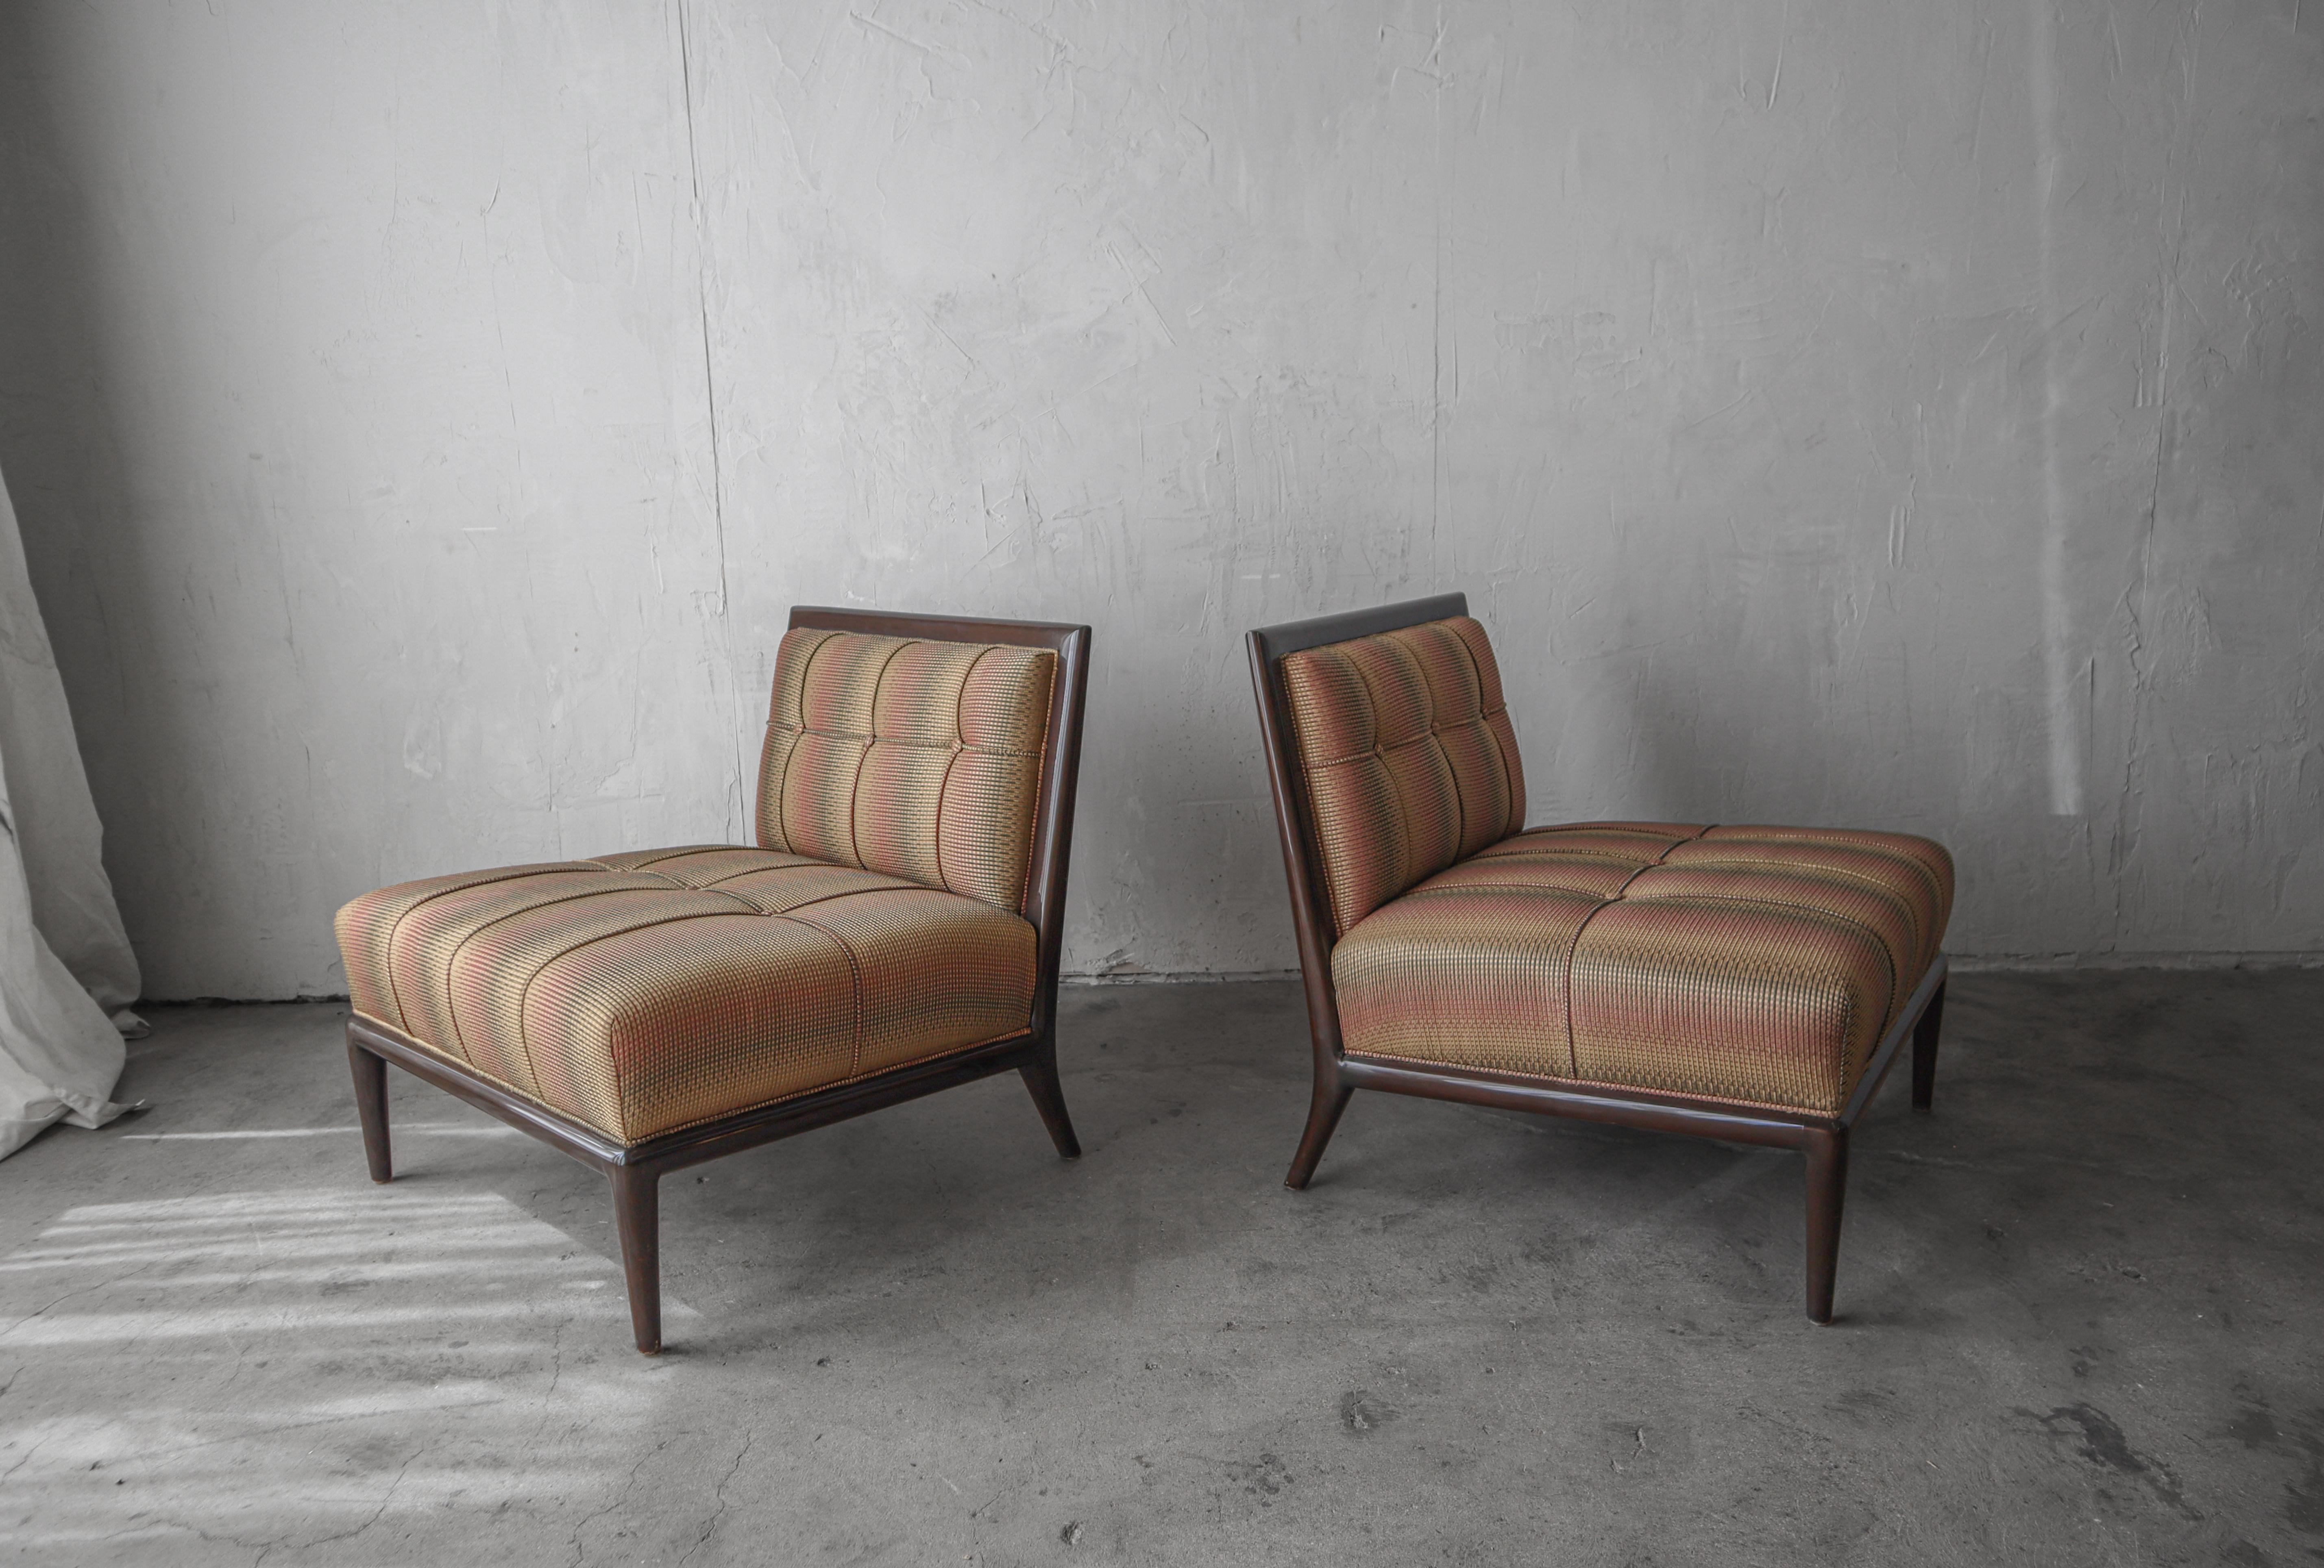 This pair of modern elegant slipper chairs by Nancy Corzine channel a classic mid century design from the 1950s by T.H. Robsjohn Gibbings and Manufactureed by Widdicomb.

They are left as found in excellent, all original condition.  The frames are